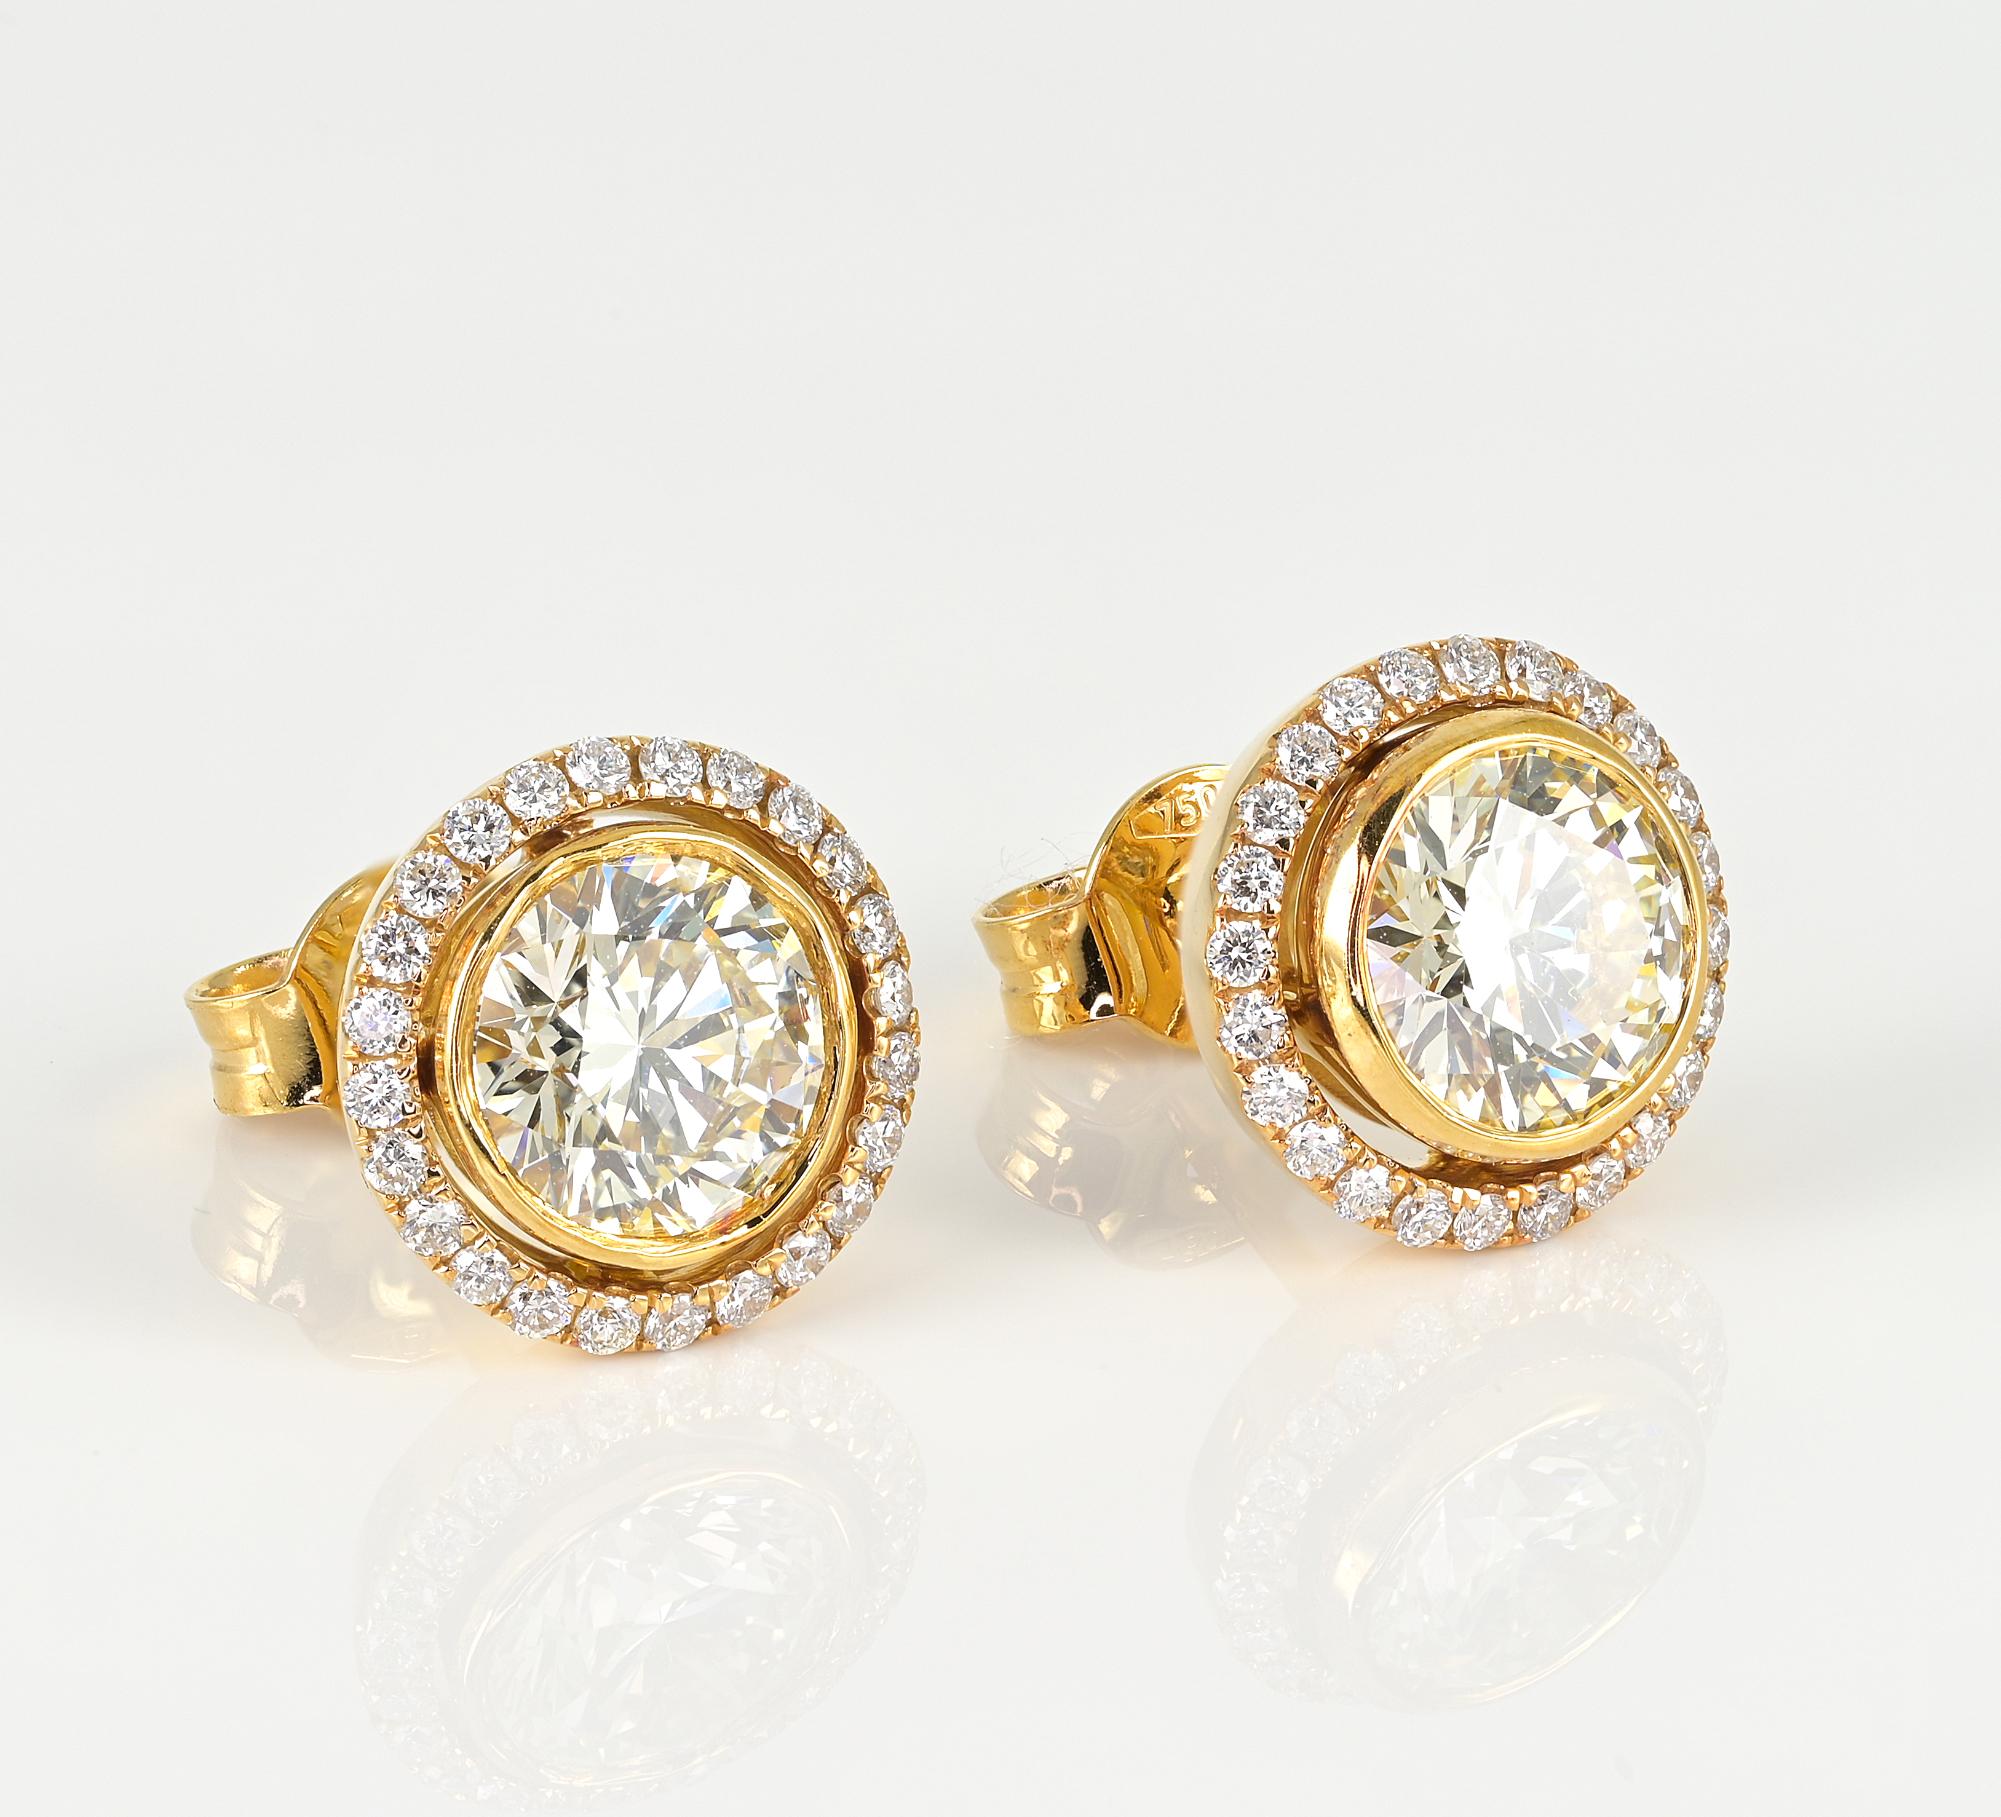 Vintage Diamond target design ear studs
Mid century, 1950 ca
Hand crafted of solid 18 Kt gold to the highest standards, assay stamped together with Diamond content and serial number
Centre Diamonds together weighing 2.08 CT (1.02 – 1.06) rated J/K